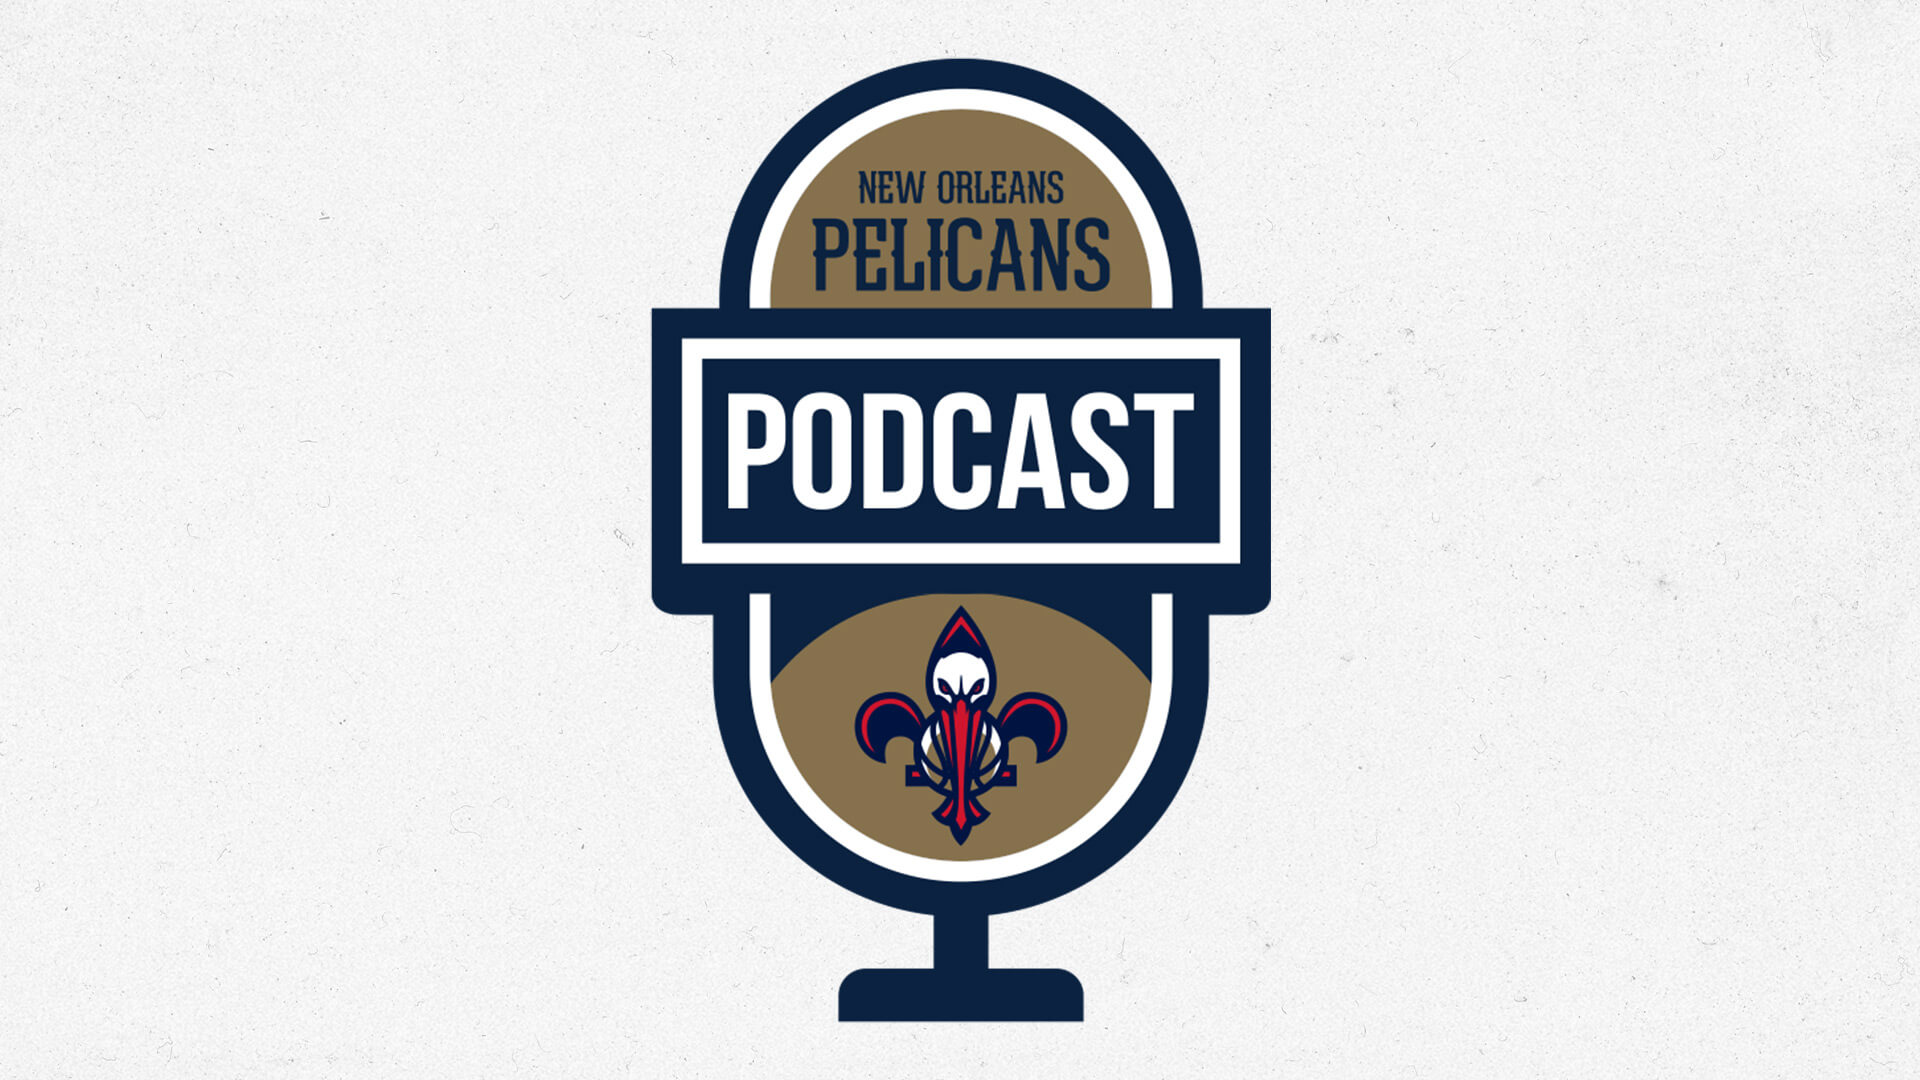 Madison Hock talks Herb Jones, tight NBA Western Conference playoff race | Pelicans Podcast